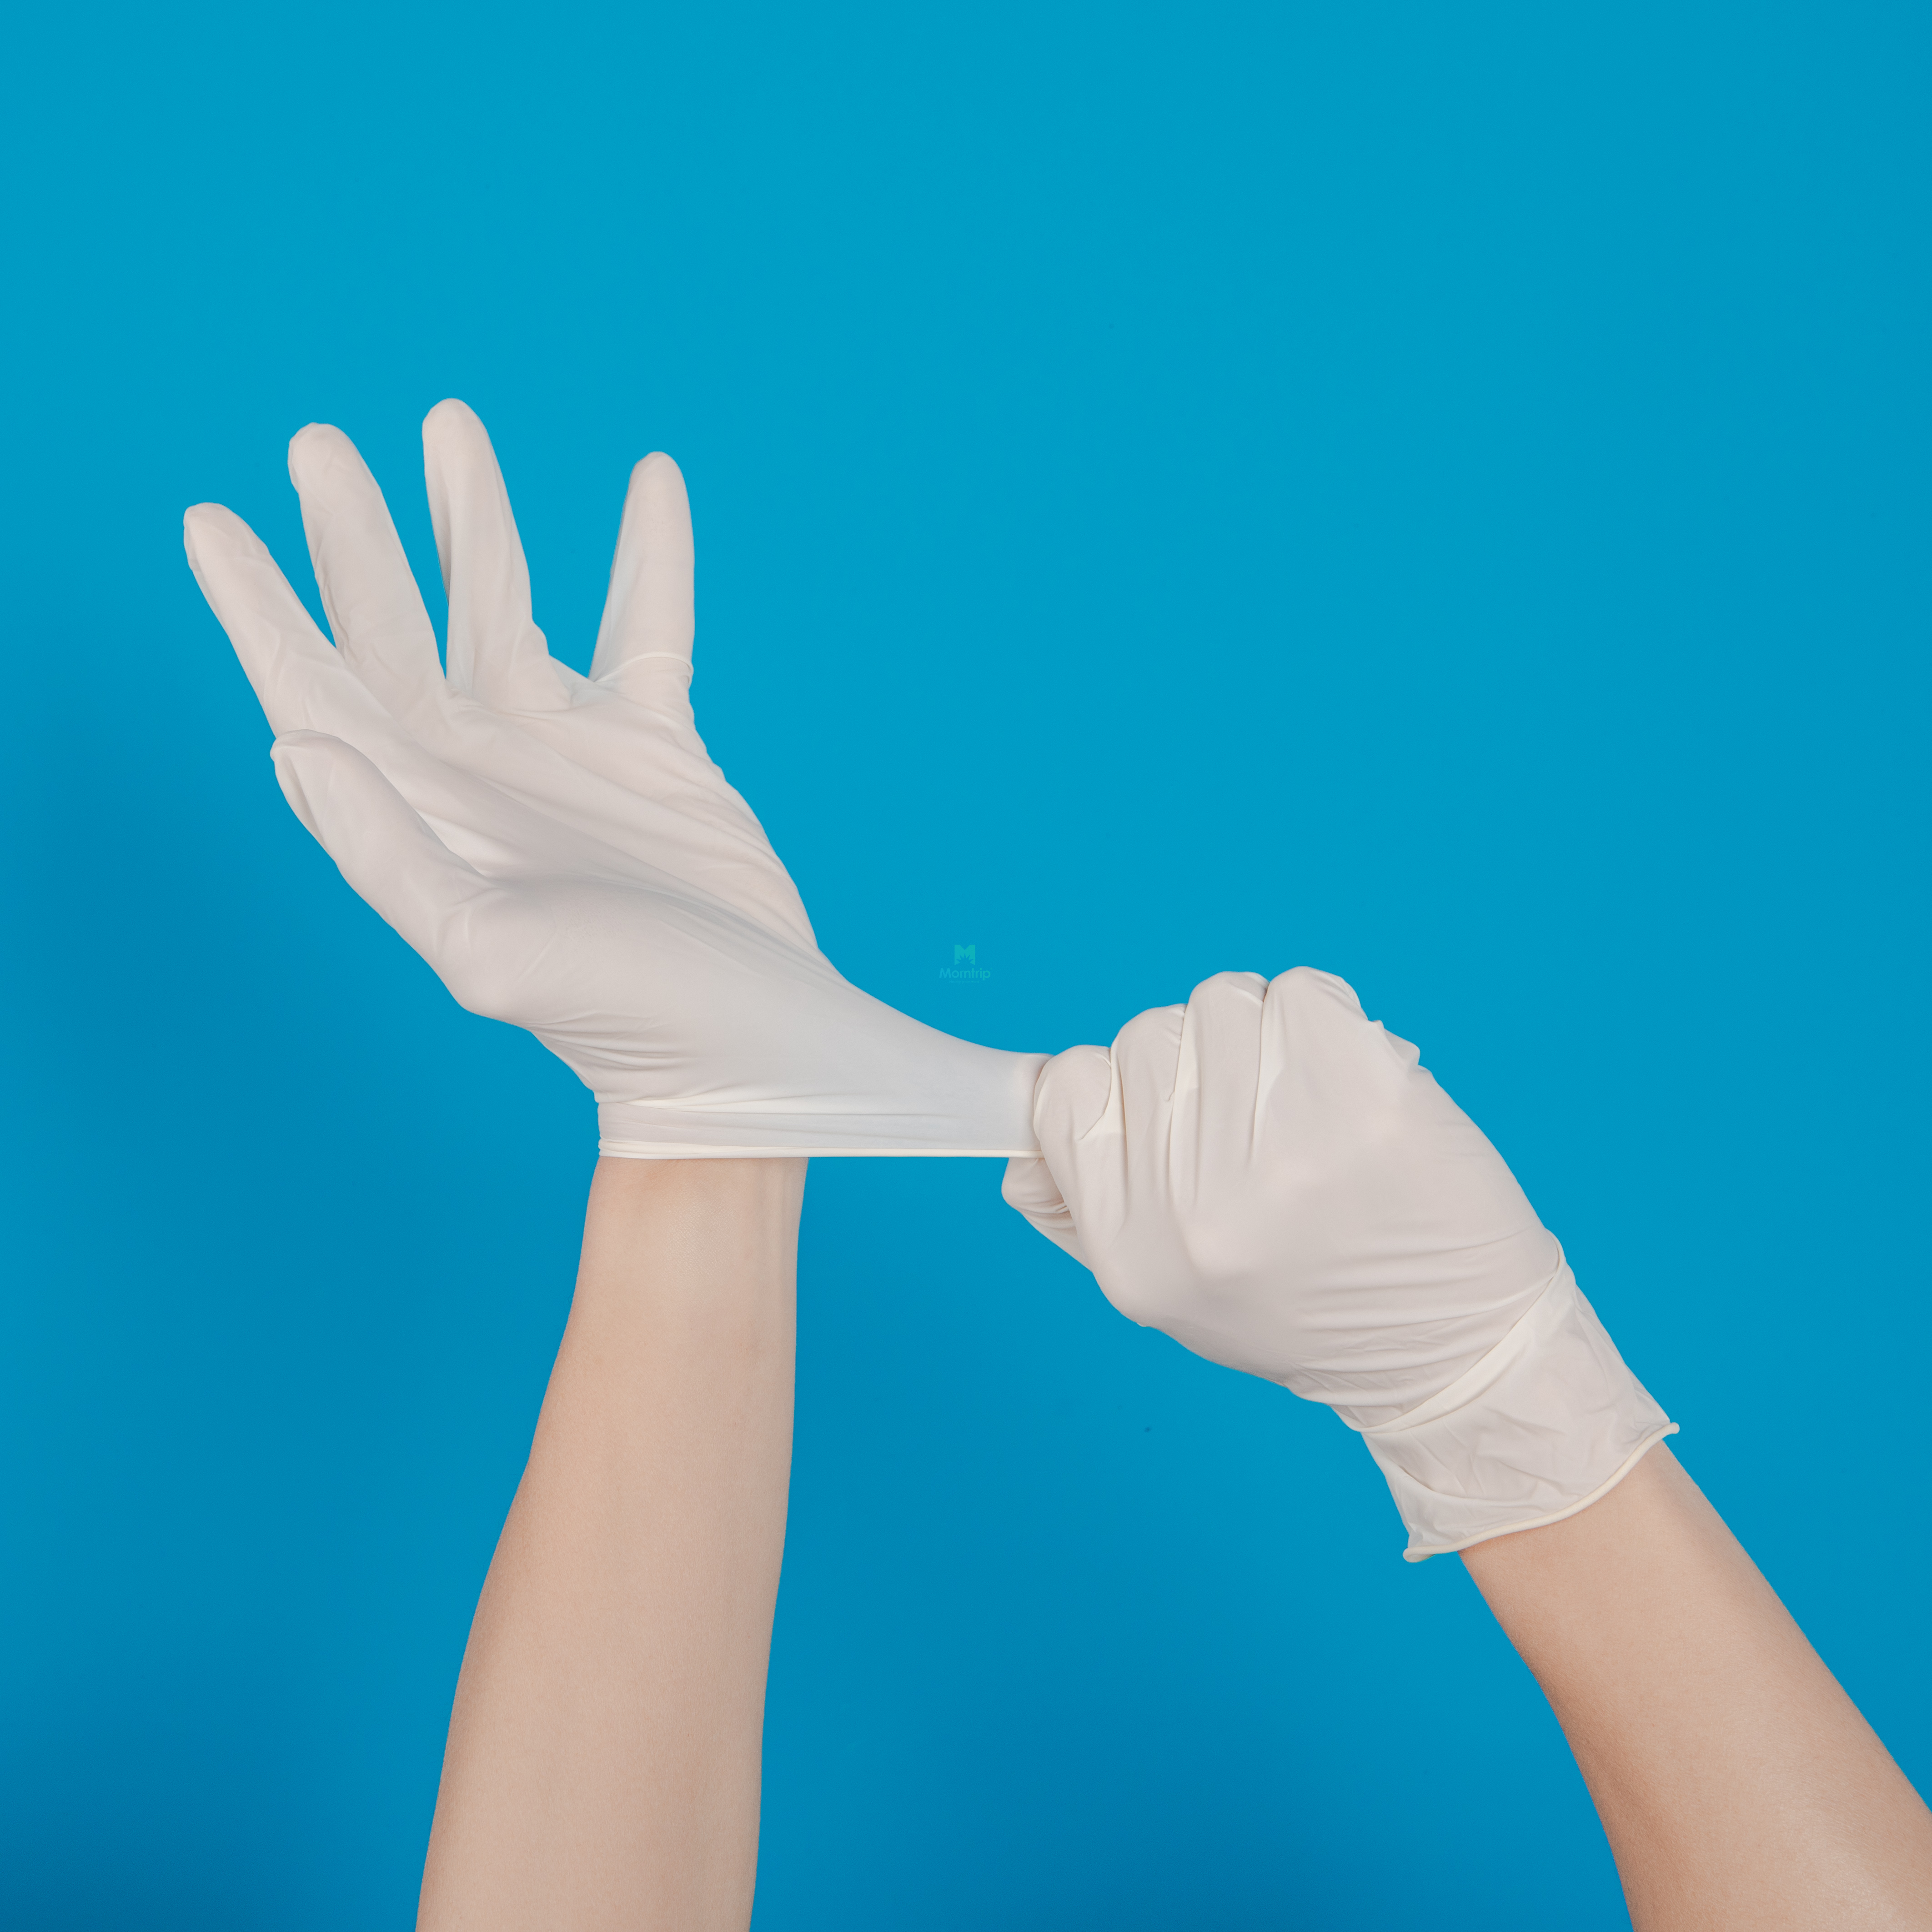 Wholesale Safety Disposable Protective Powder Free Examination Latex Gloves